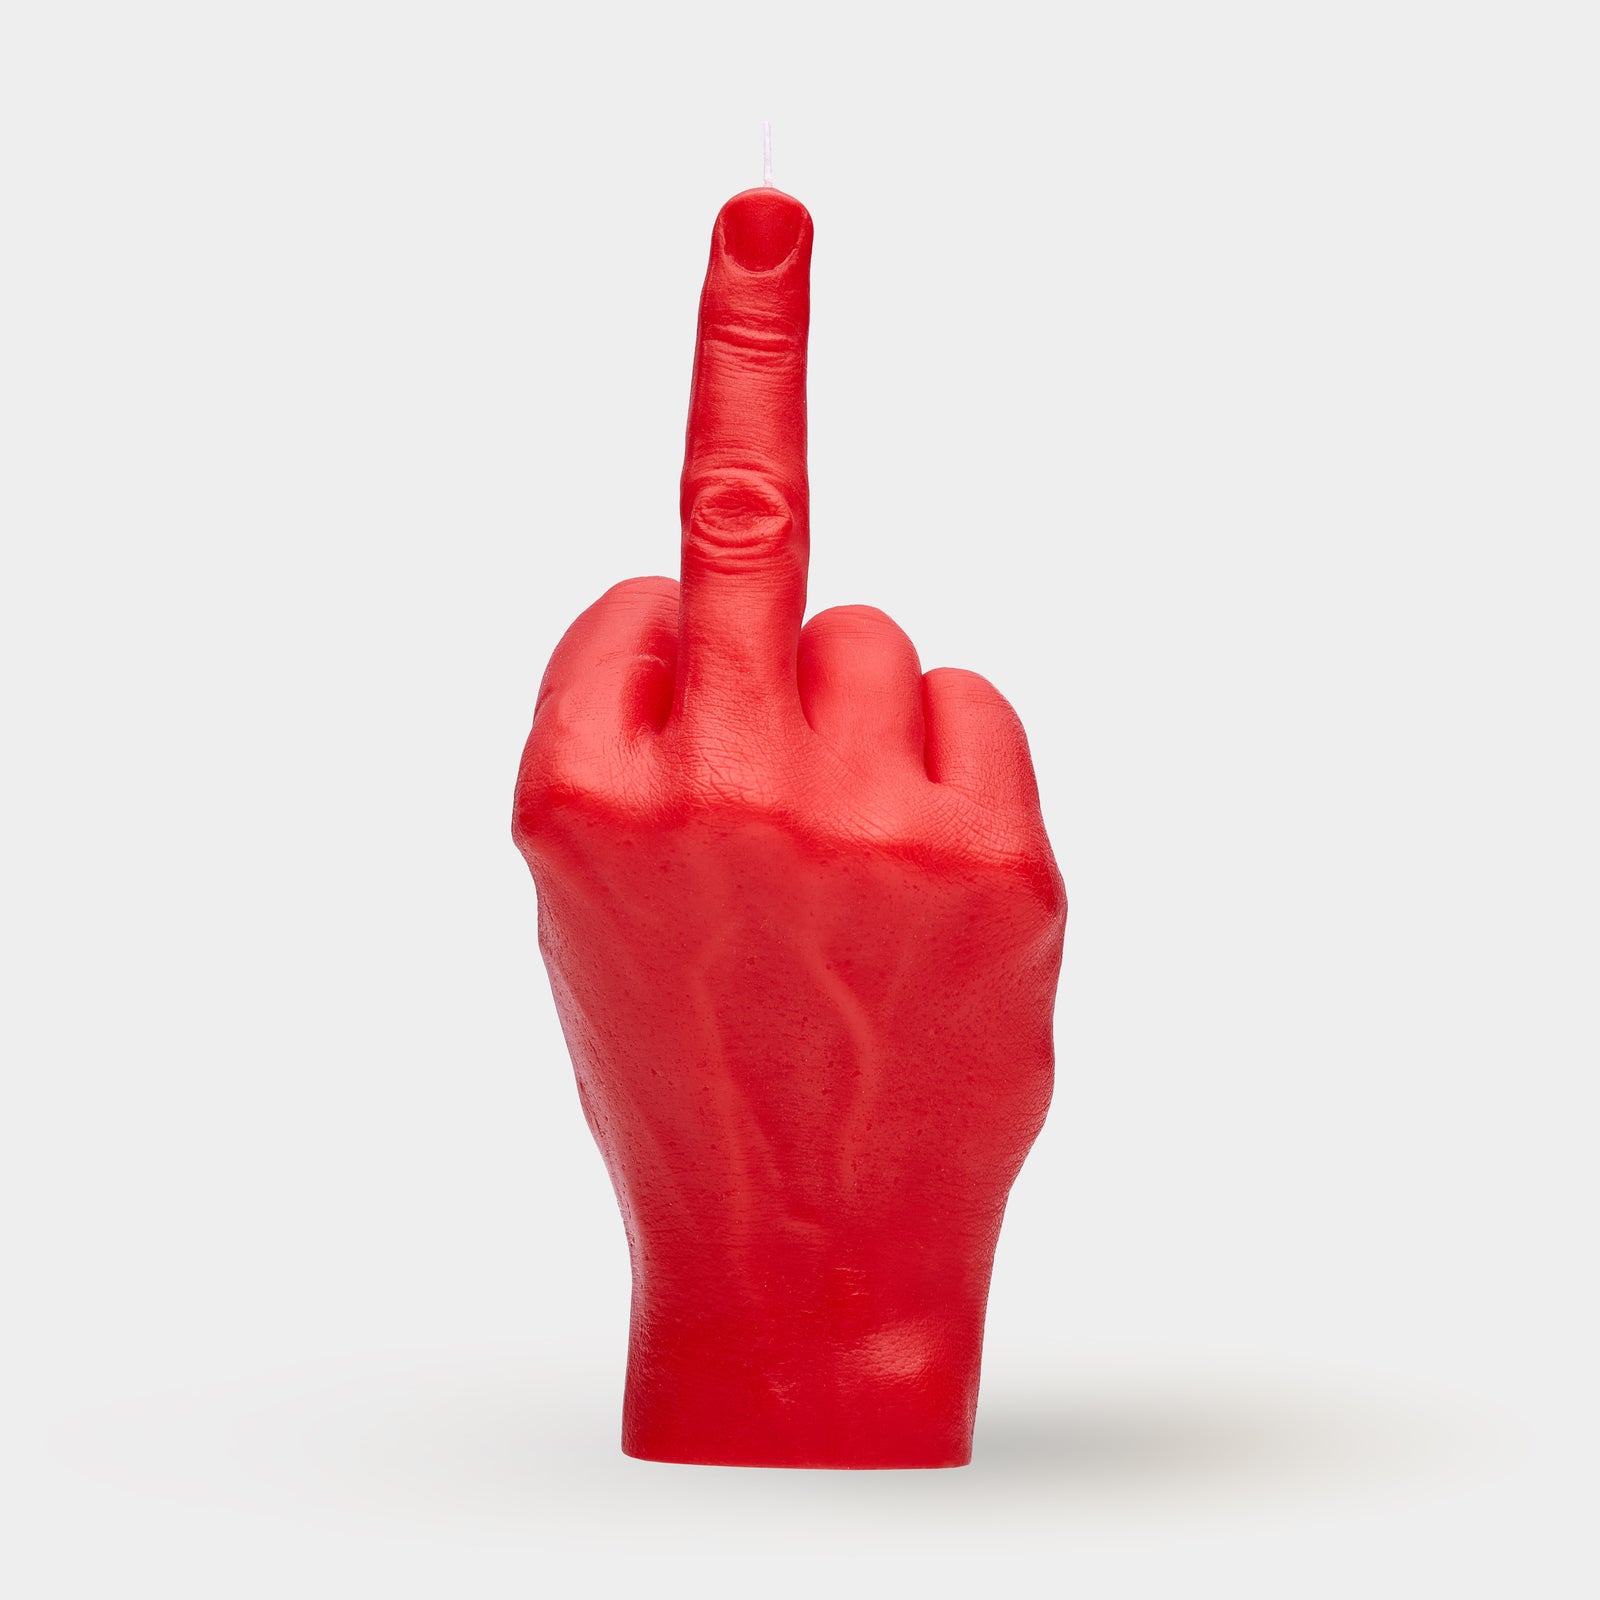 F*ck You Hand Gesture Candle | Red